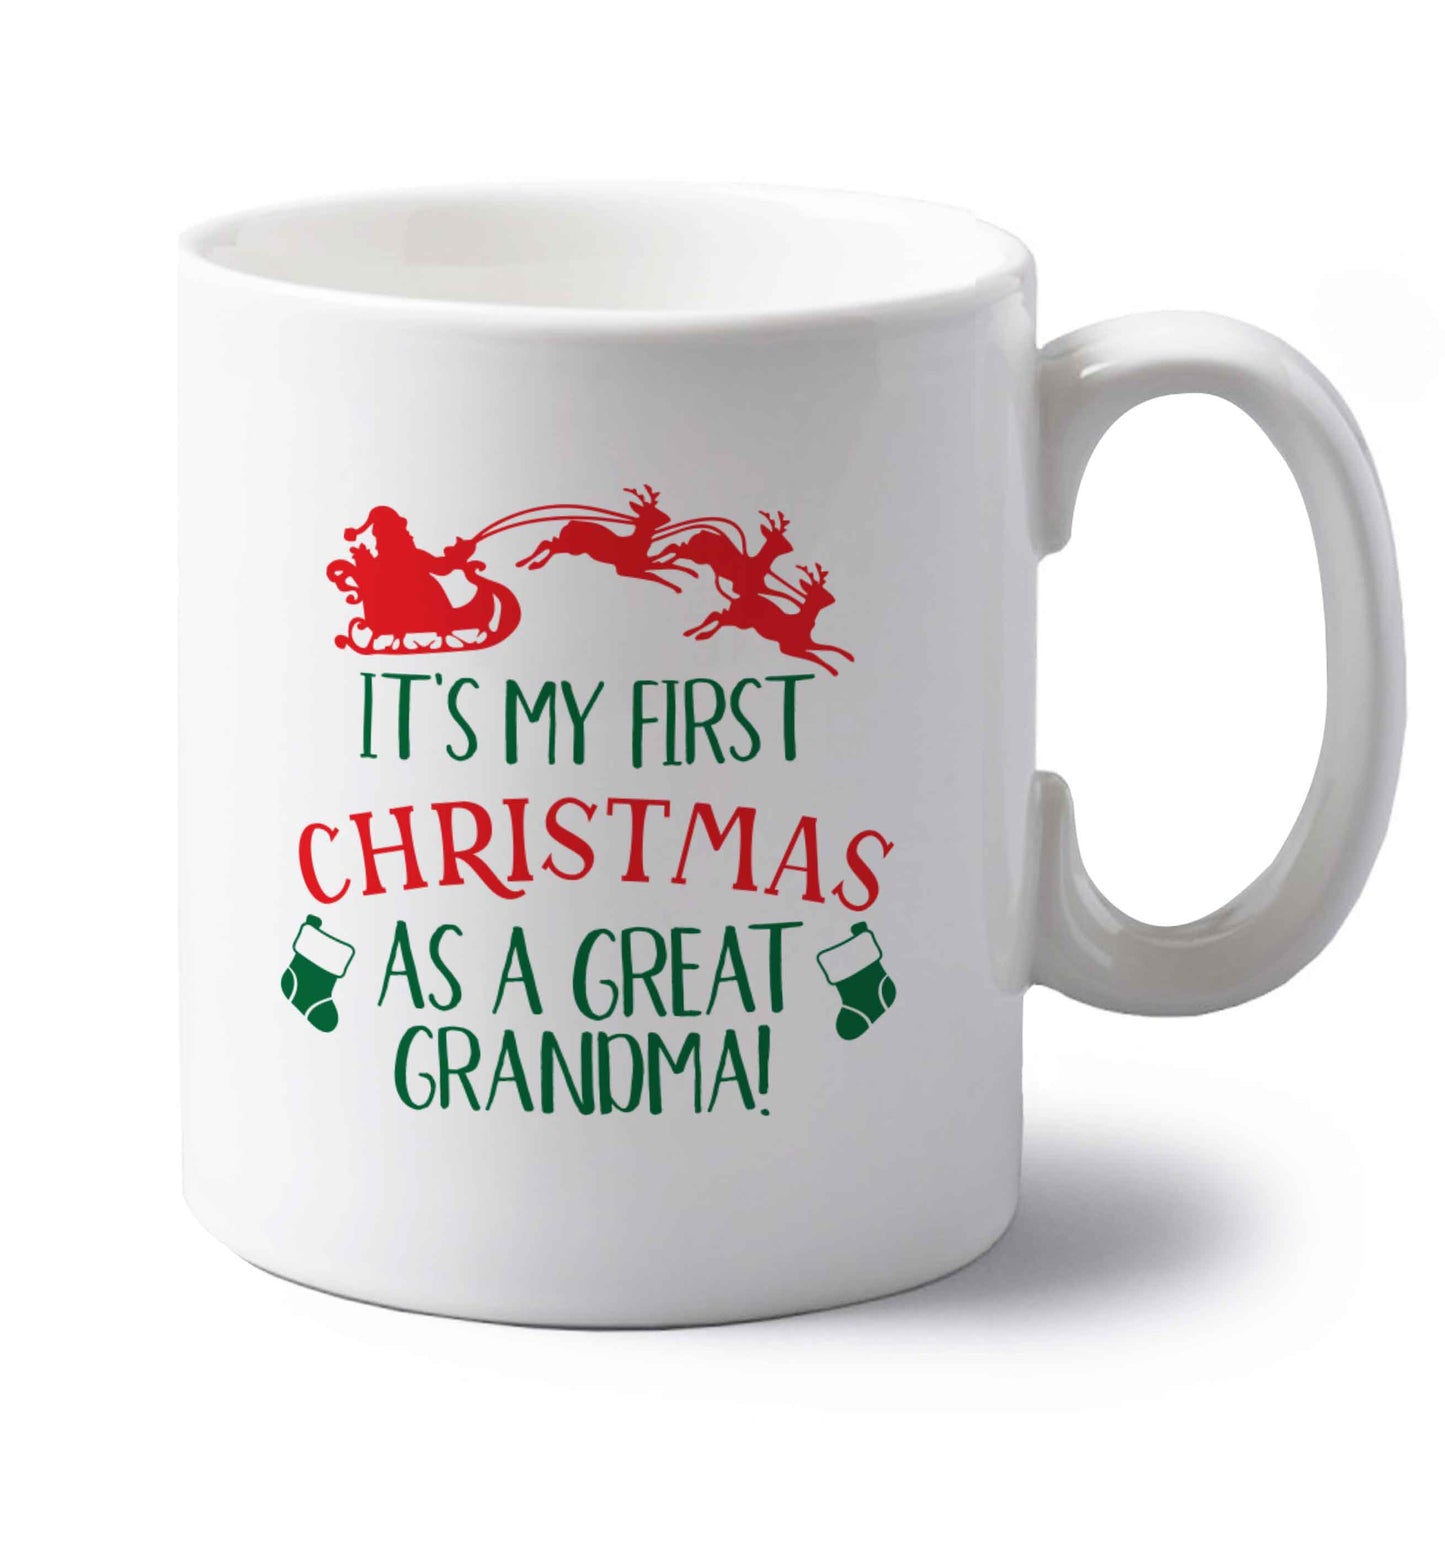 It's my first Christmas as a great grandma! left handed white ceramic mug 